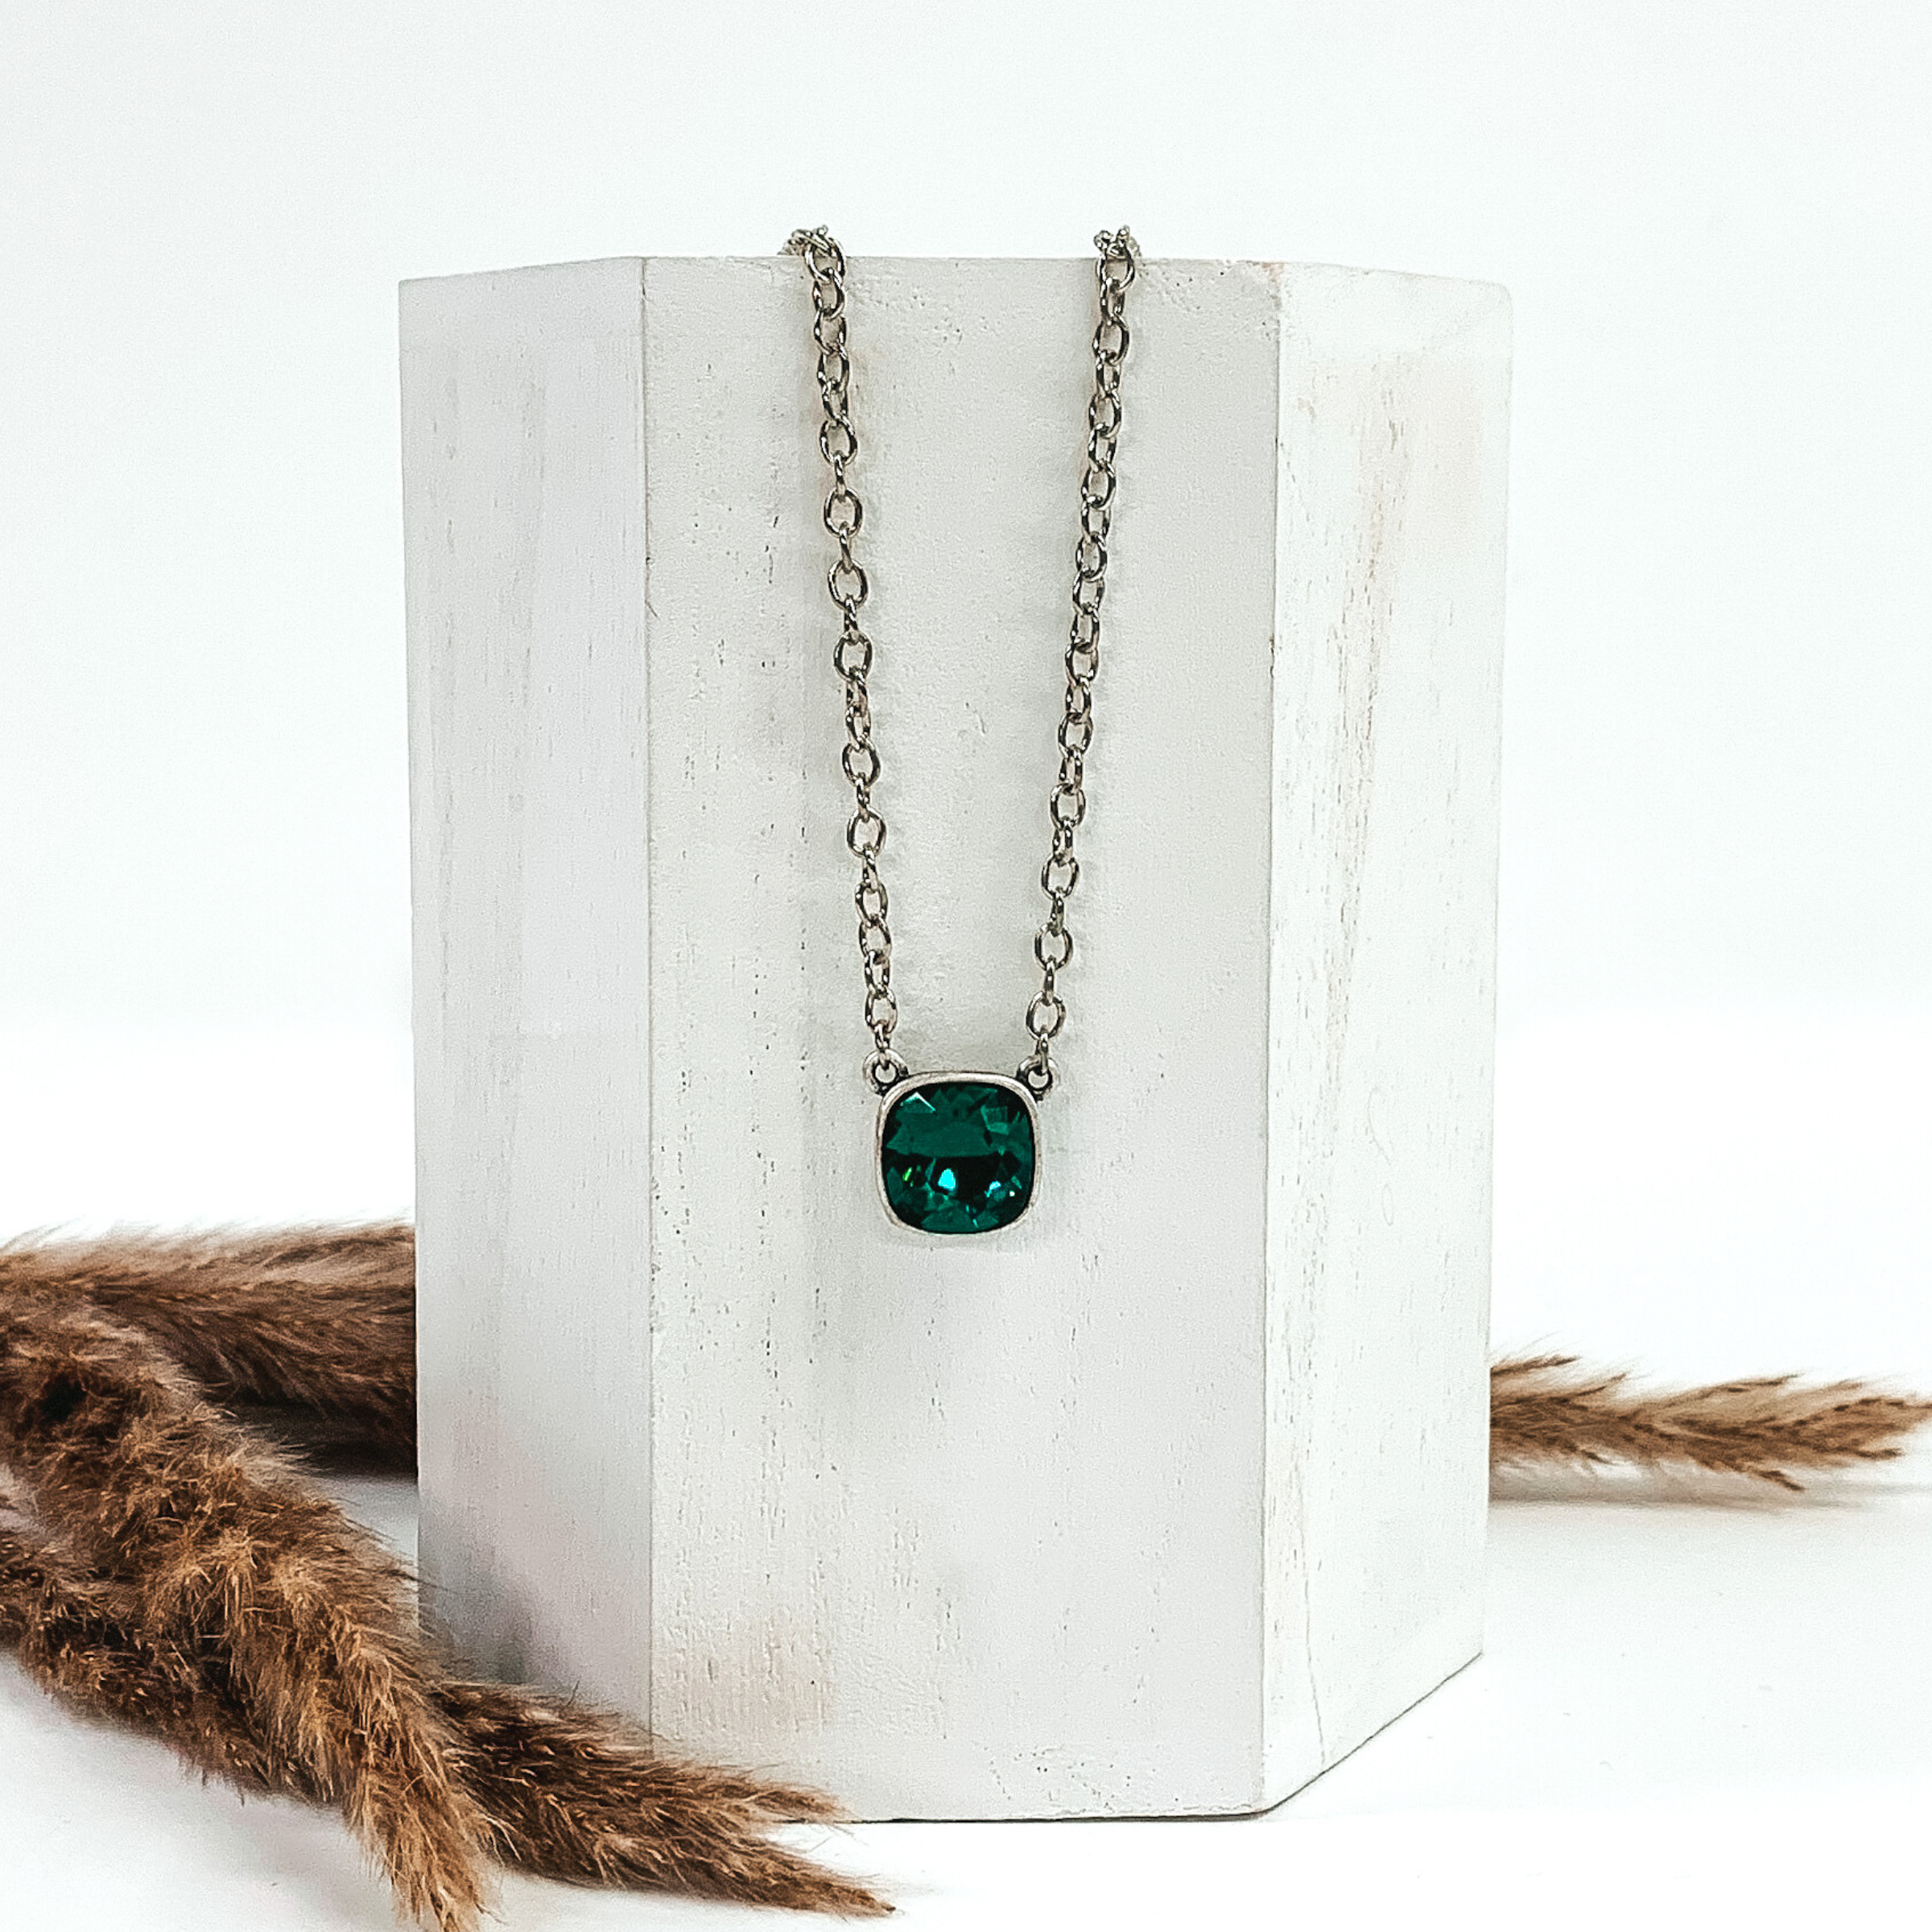 Silver chained necklace with a square emerald crystal. The necklace is hanging on a white block next the brown floral decor